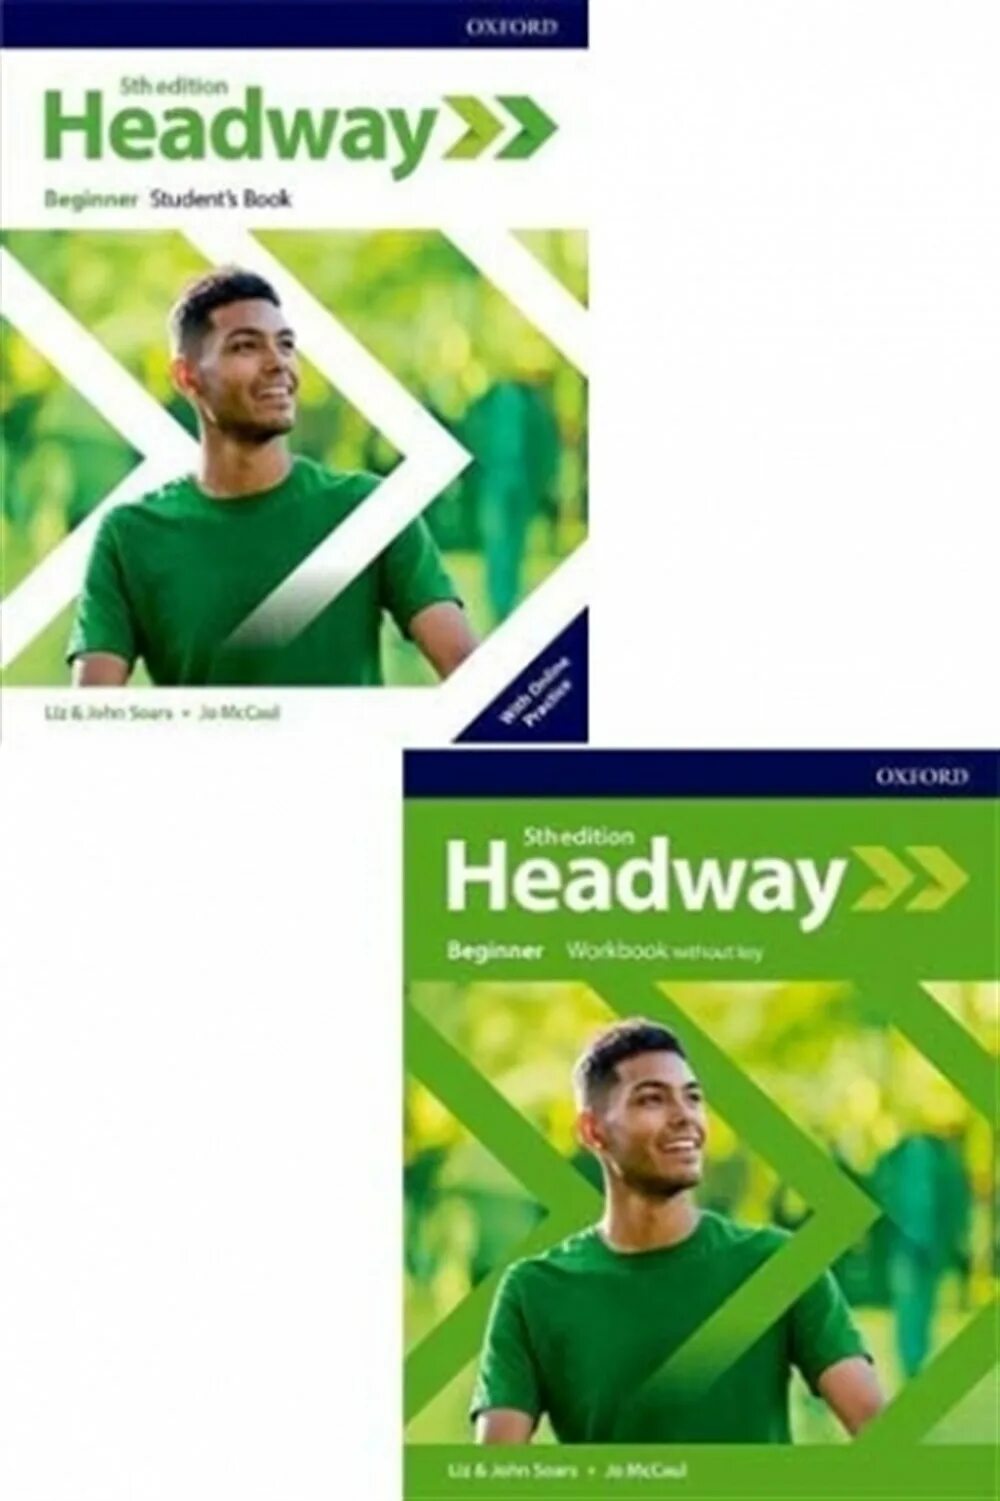 Headway students book 5th edition. Headway Beginner Workbook 5th. New Headway Beginner 5 th students book. Headway 5 Workbook. Headway Beginner 5th Edition.